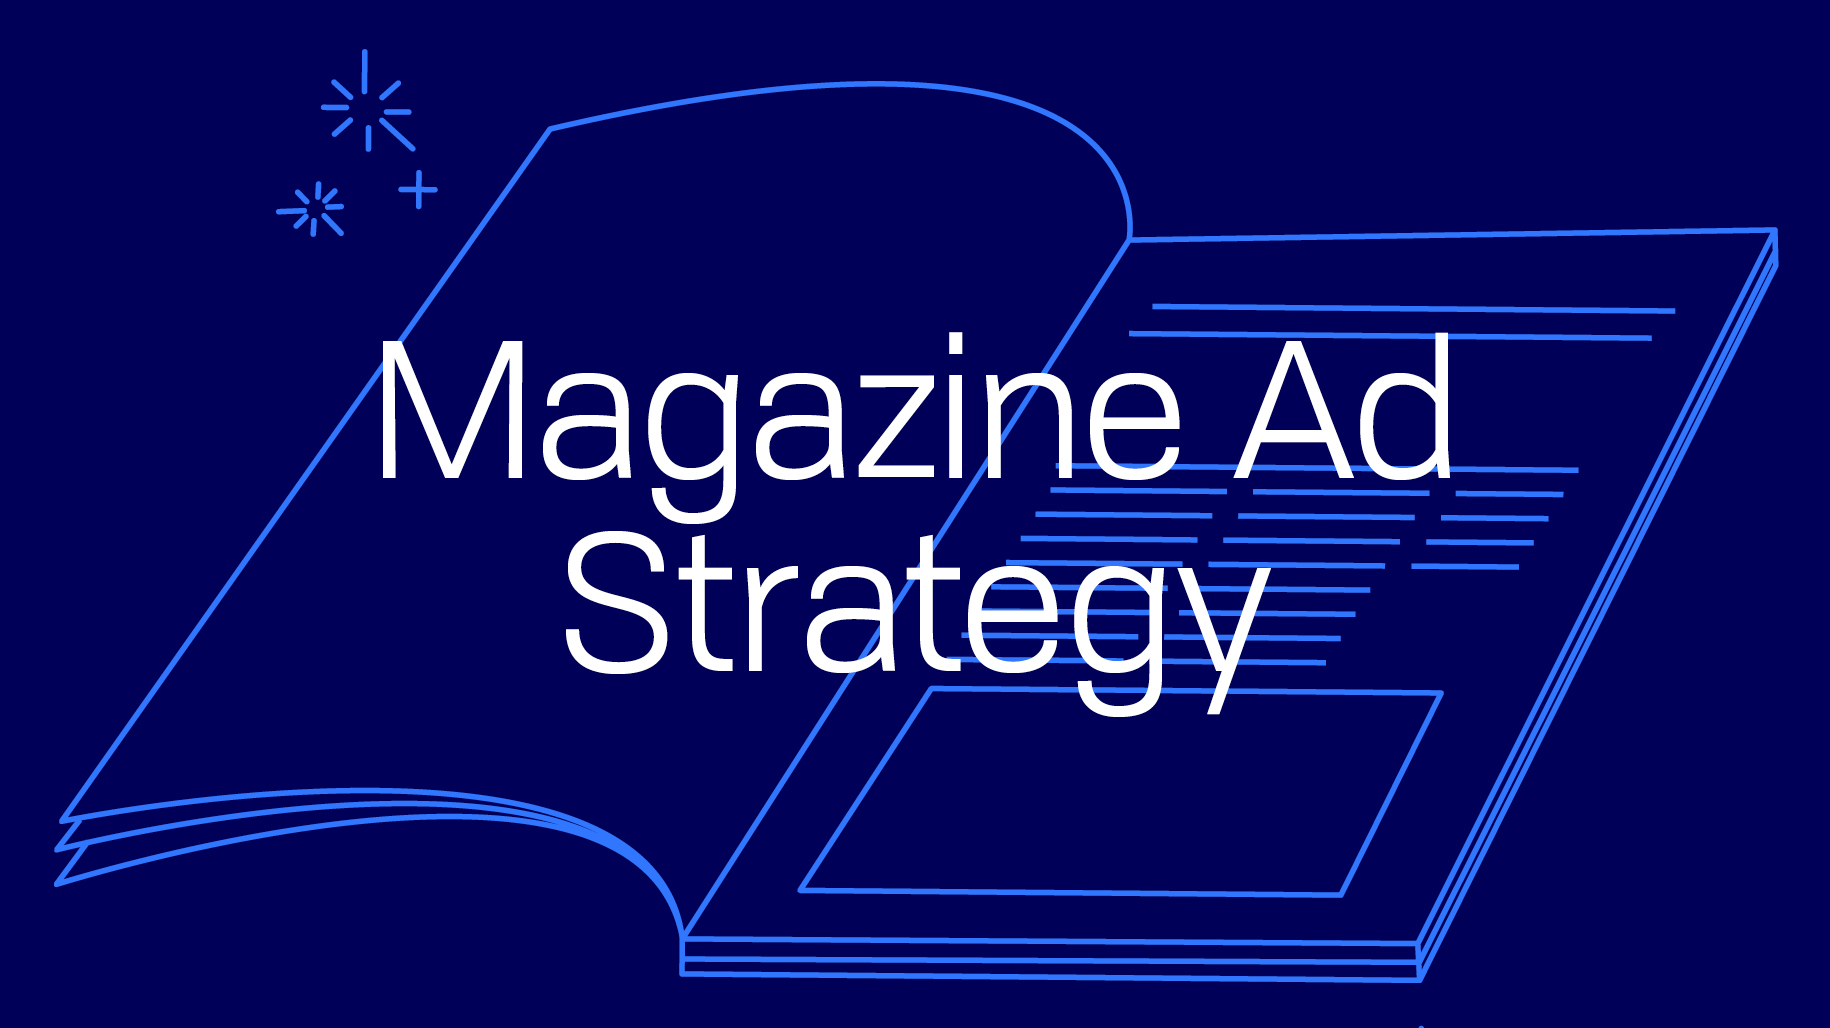 Right on Target: The Unfailing Aim & Precise Reach of Magazine Ads